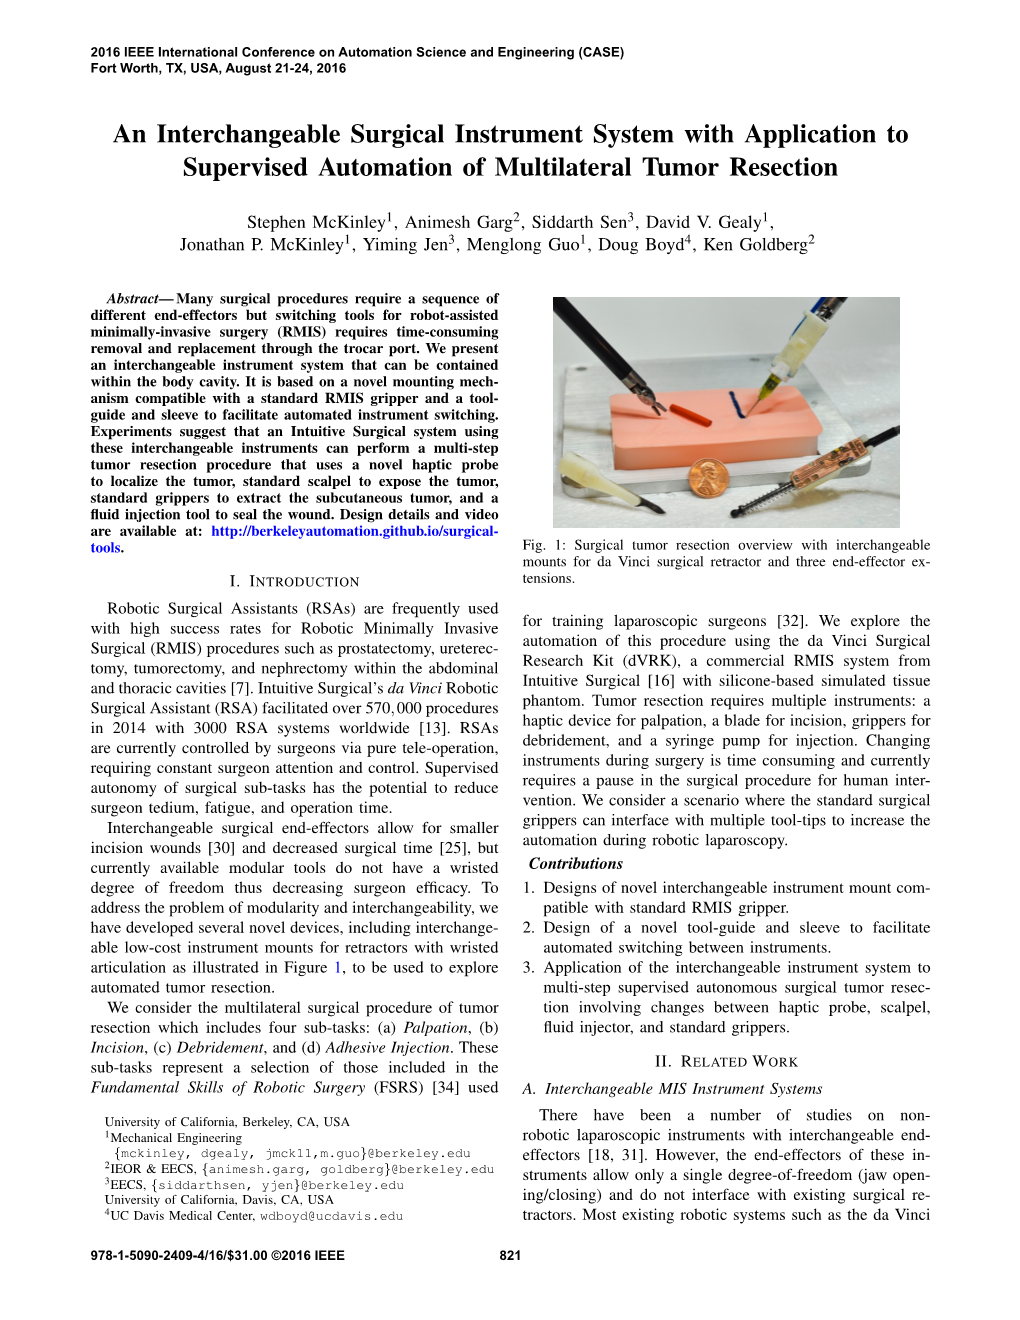 An Interchangeable Surgical Instrument System with Application to Supervised Automation of Multilateral Tumor Resection